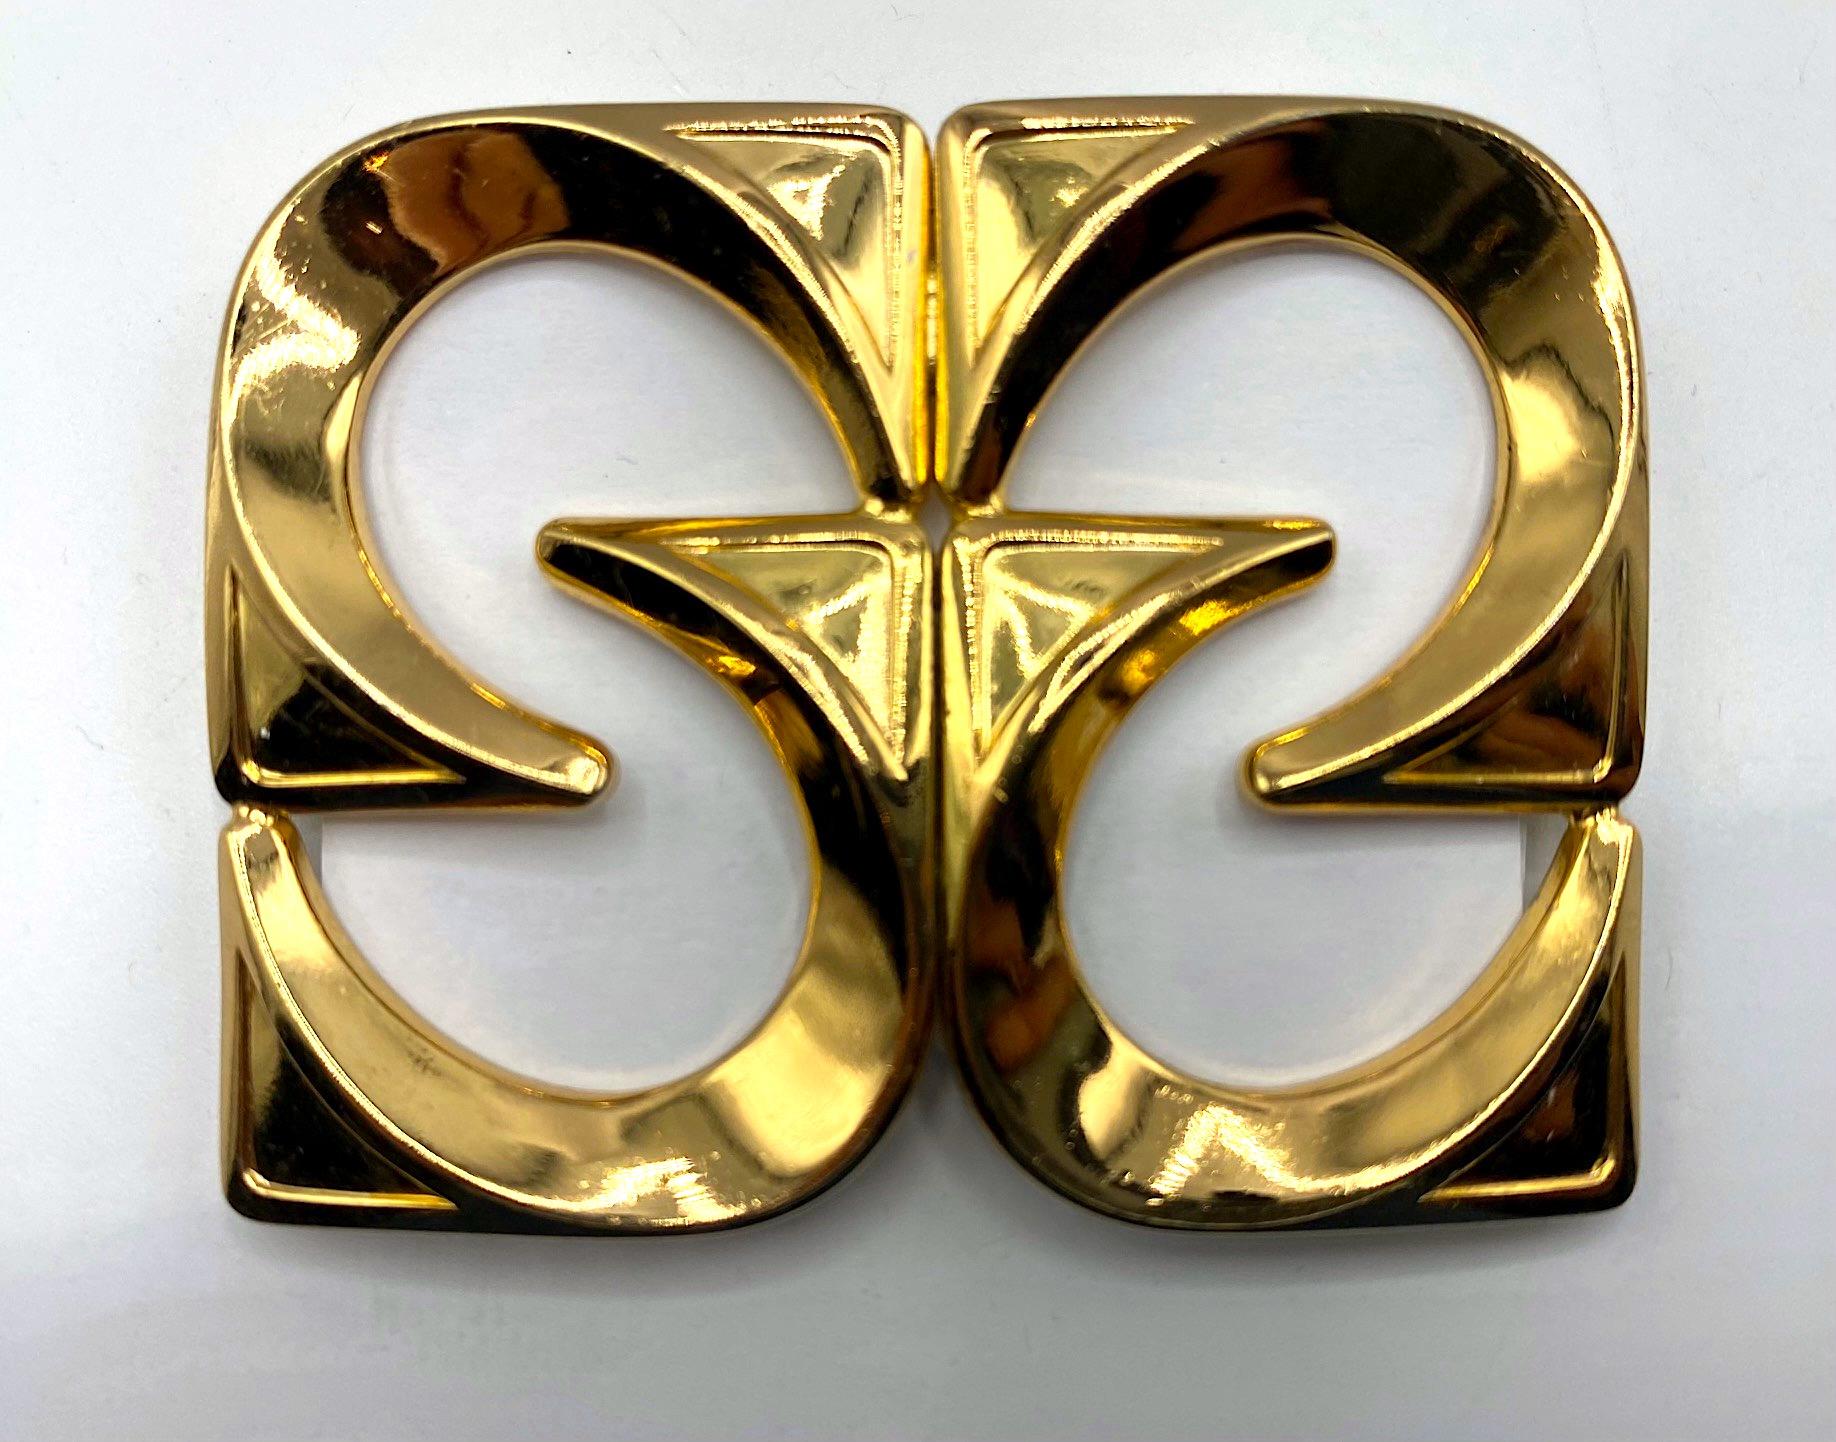 A wonderful example of a 1970s abstract modernist brooch by the well know German company Henkel & Gross. Measuring 2.5 inches wide and 1.88 inches high, the brooch is gold plated. It is comprised of a design of four square 